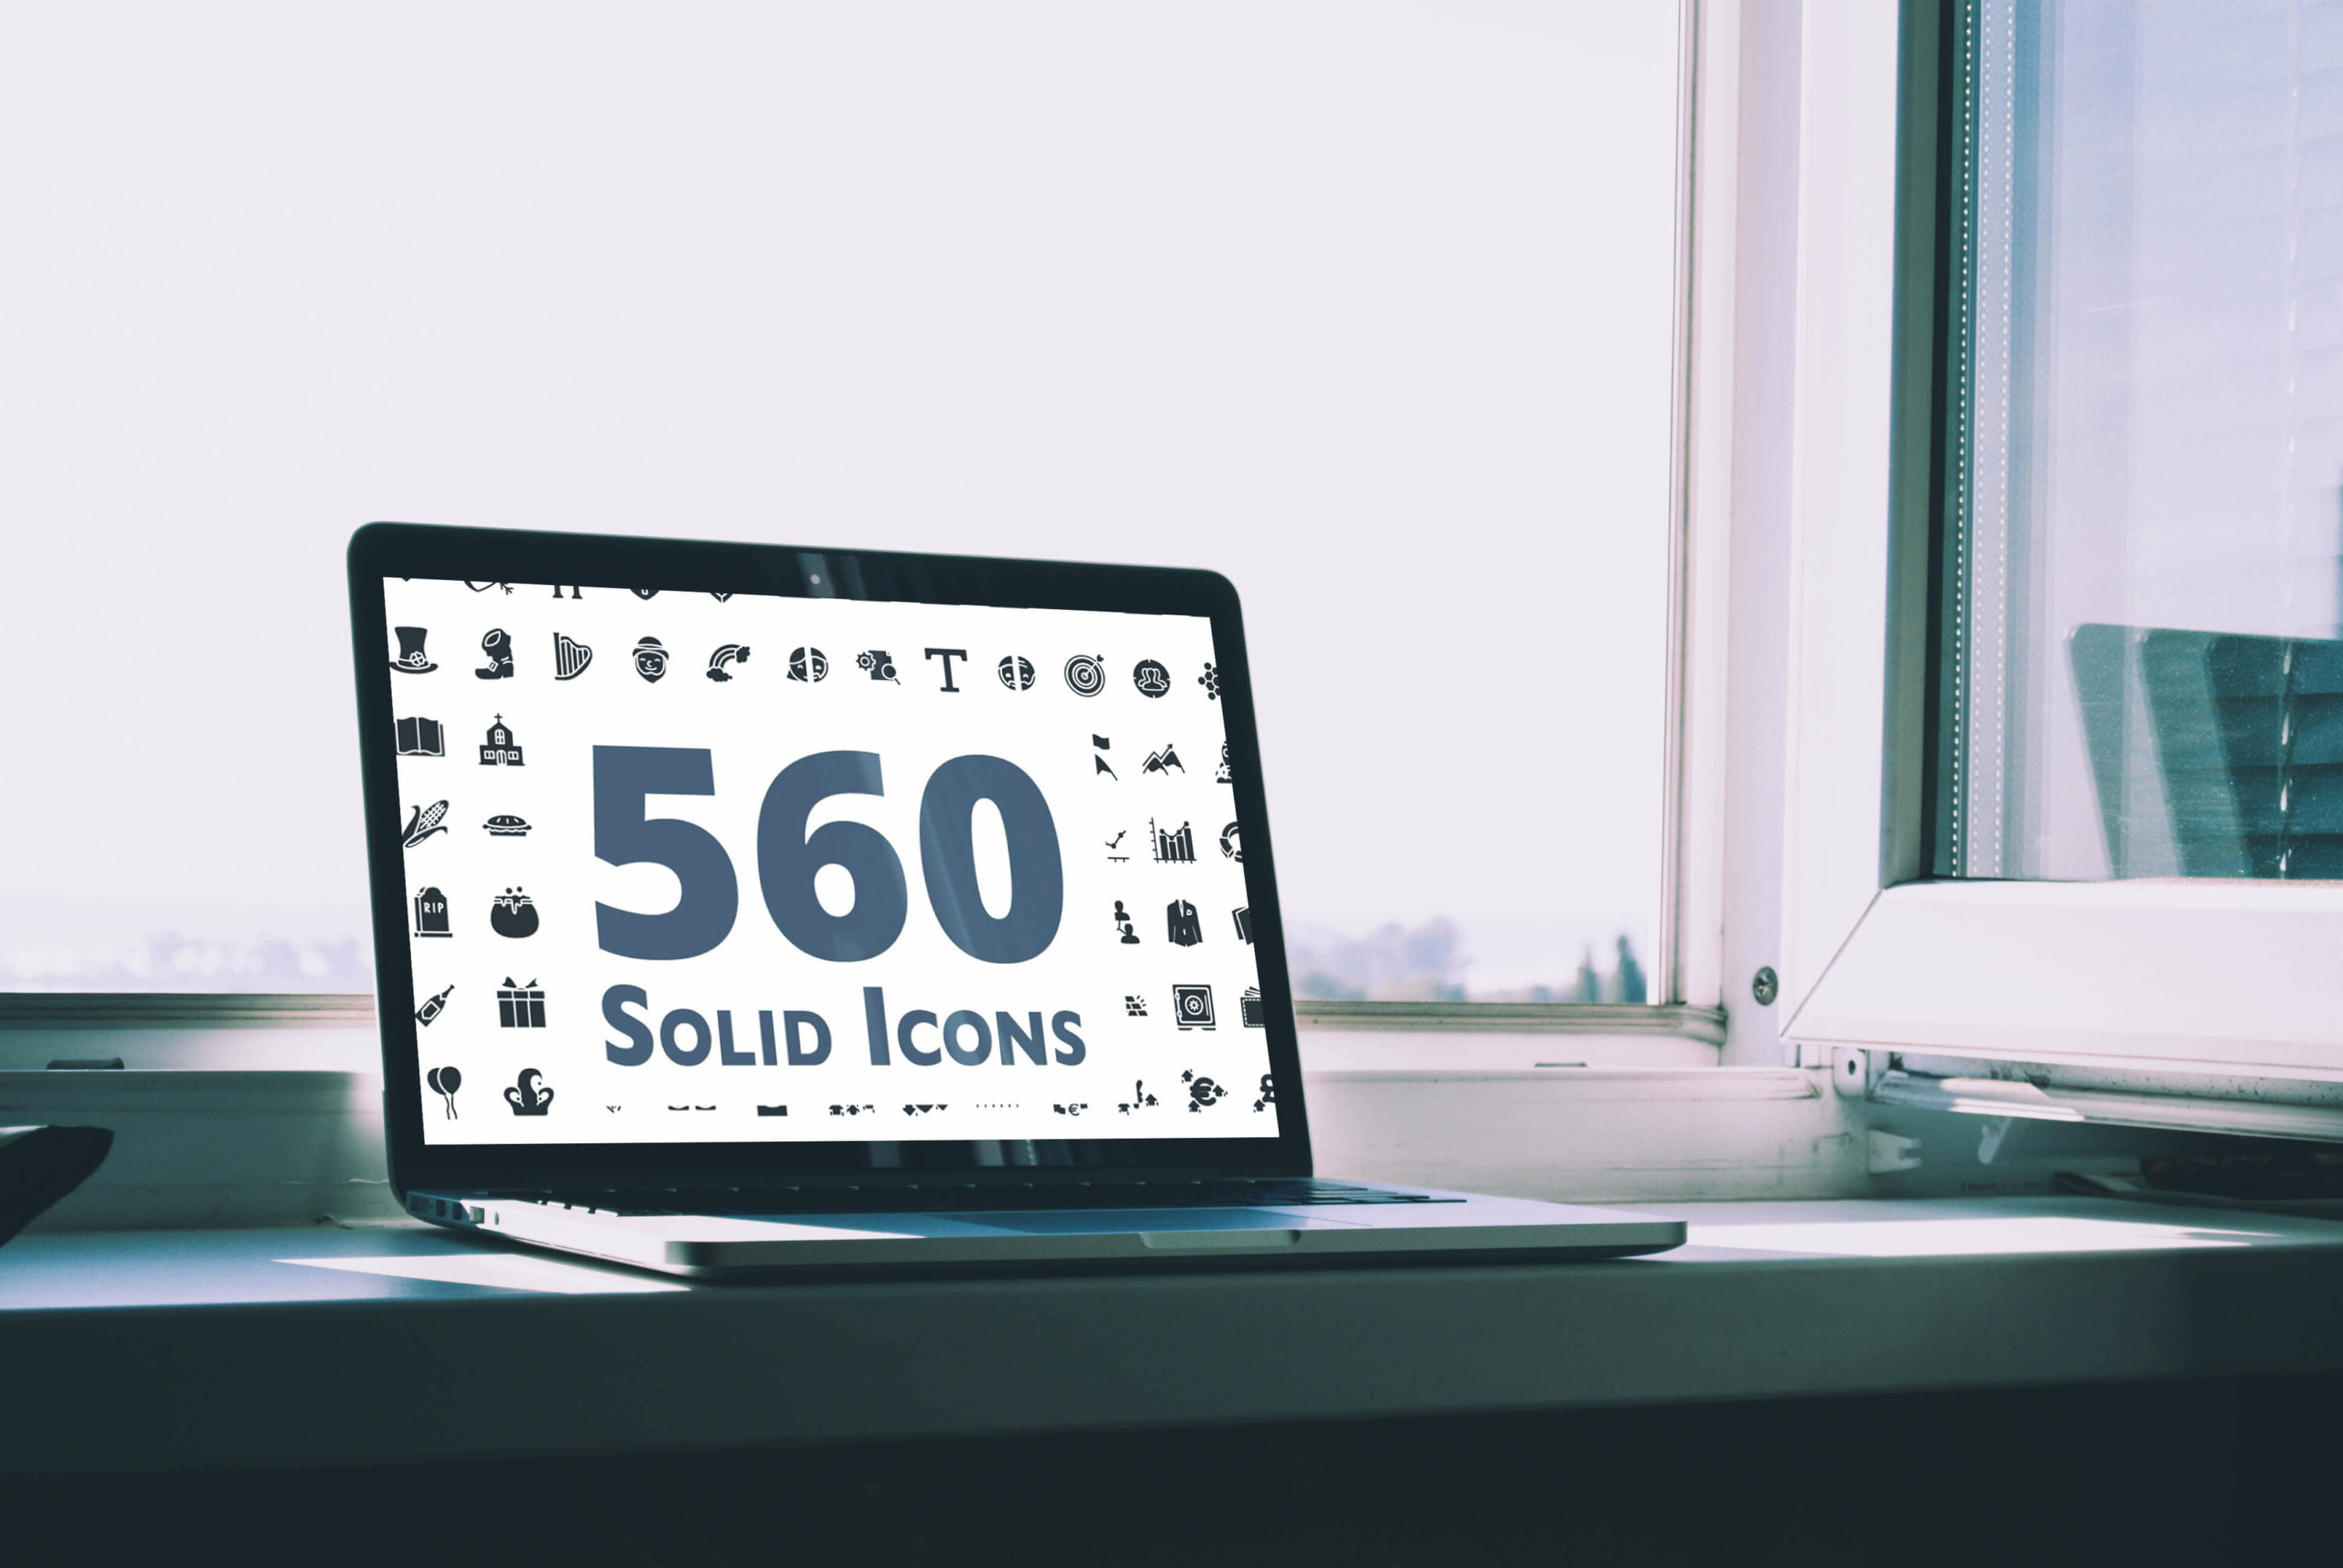 Notebook option of the 560 Solid Icons.